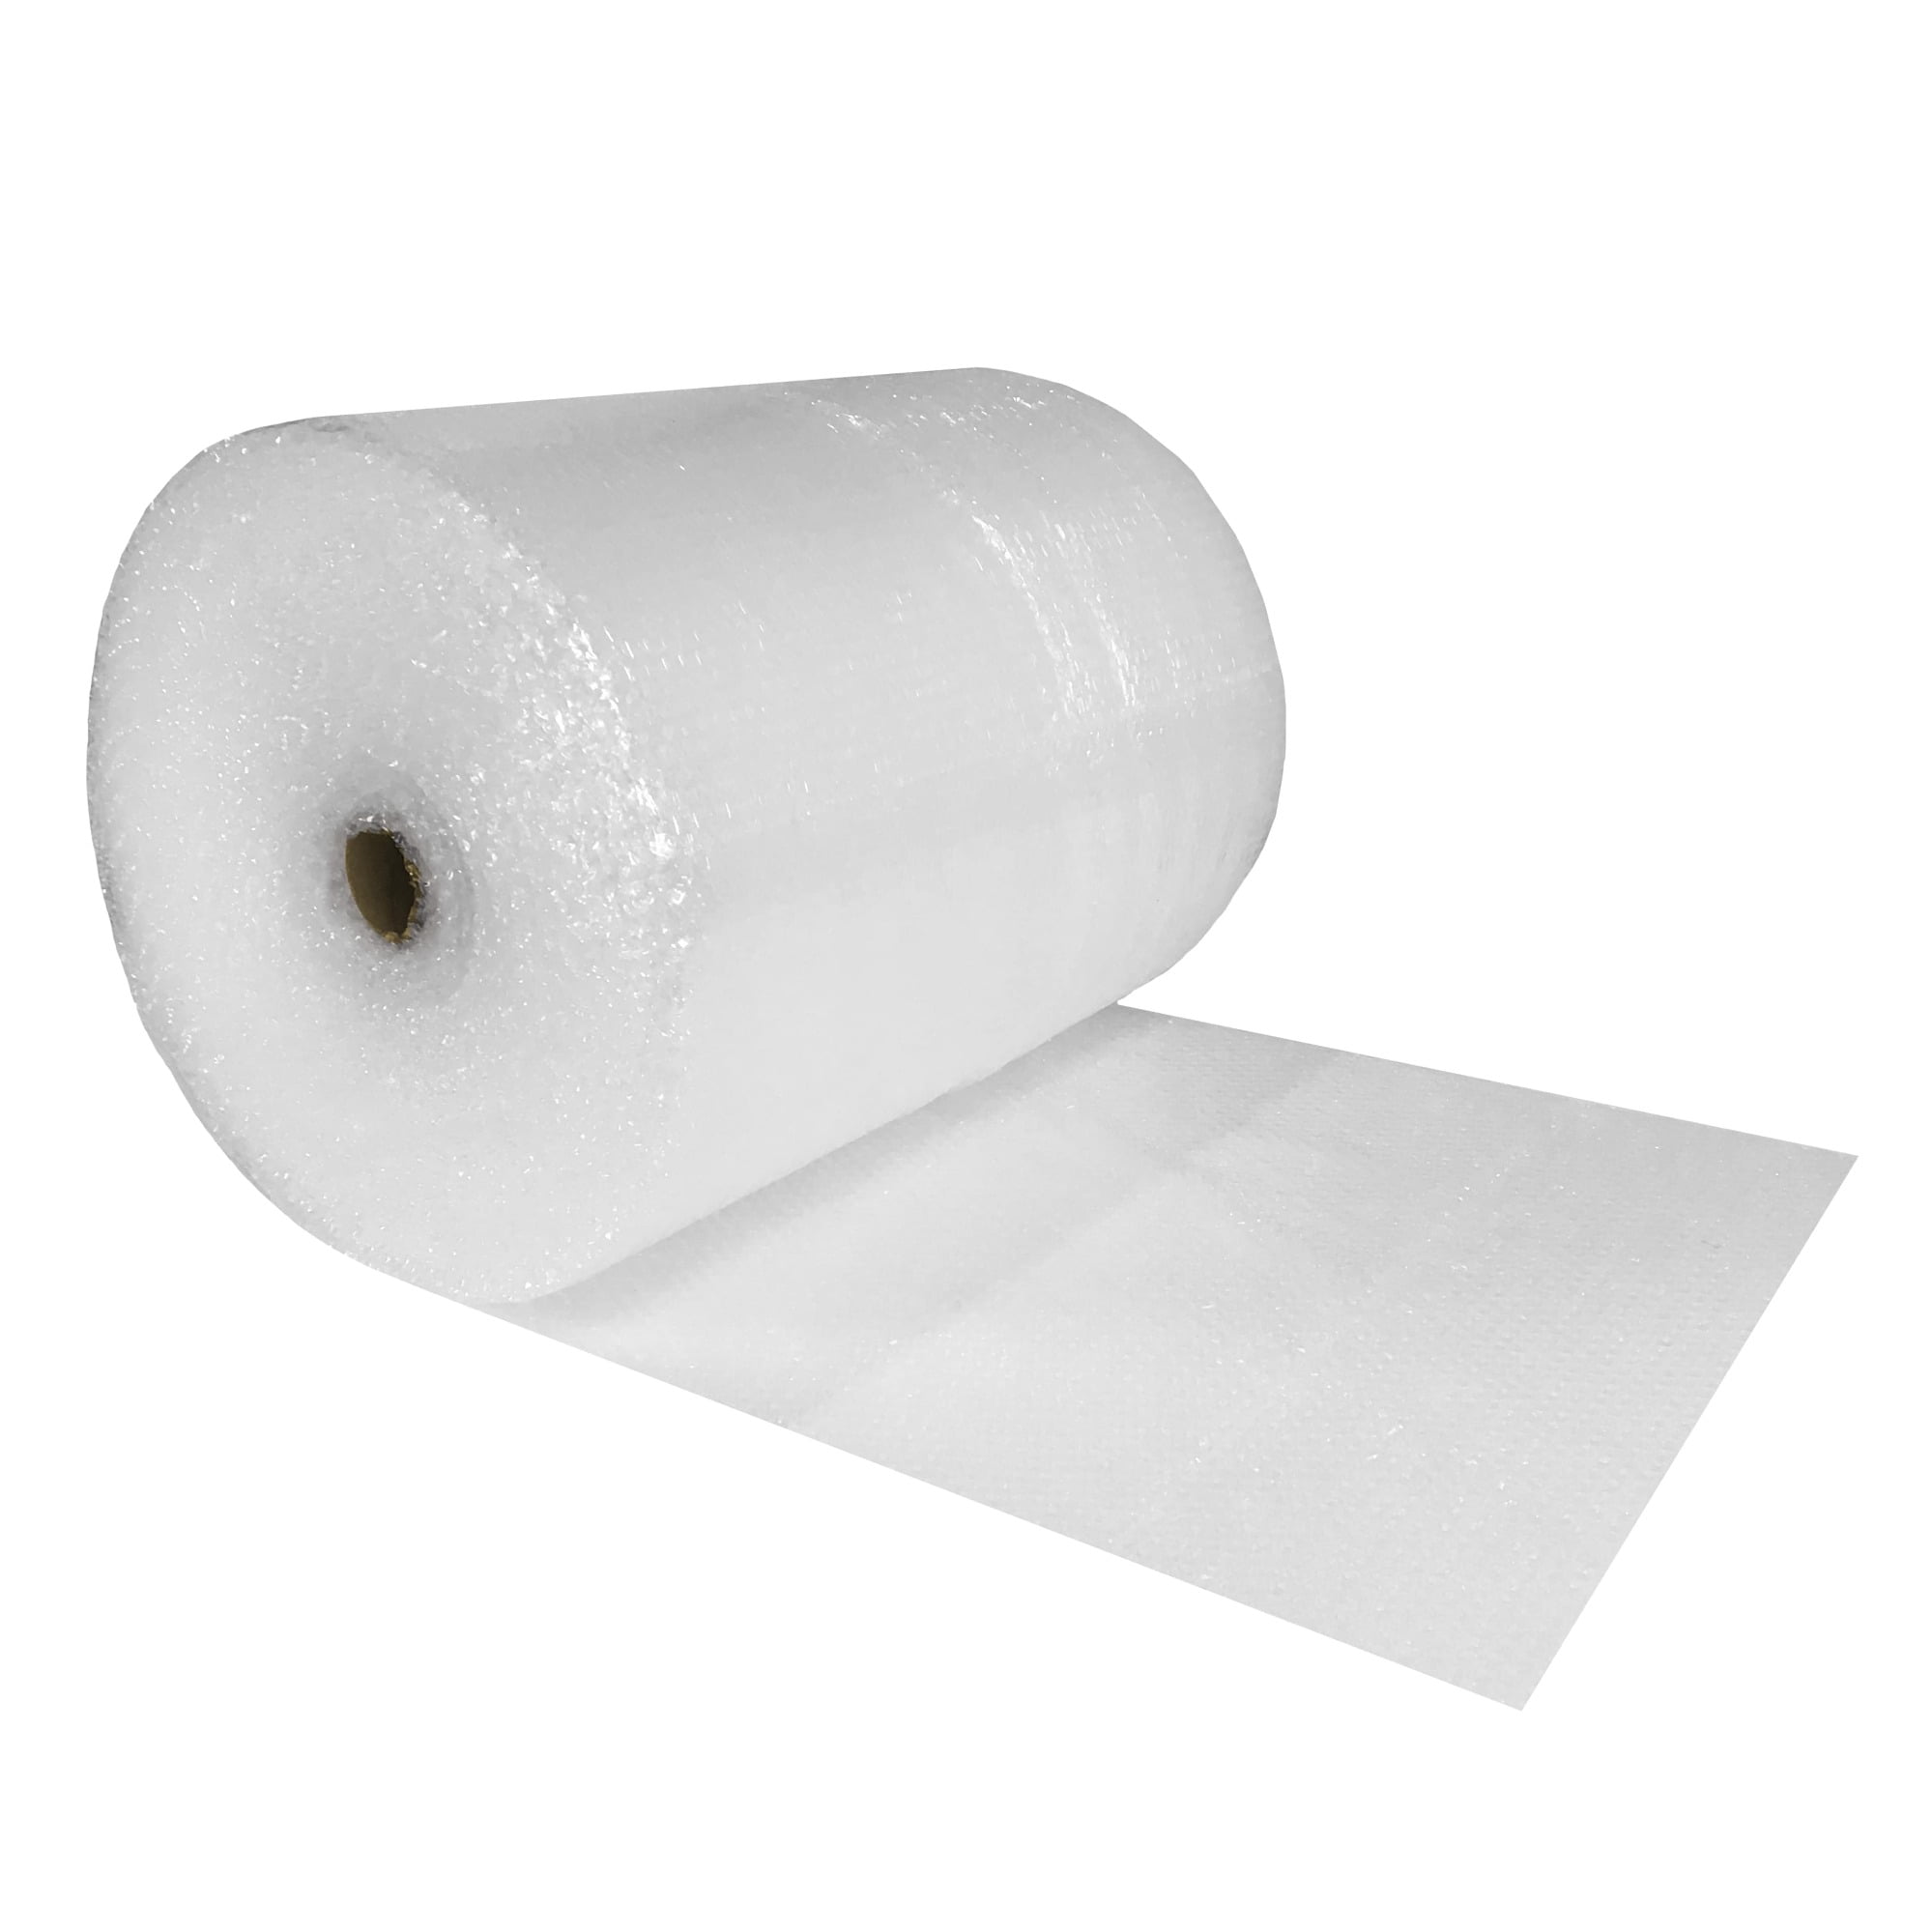 PolycyberUSA 3/16" Small bubble Wrap 12" Width Roll Perforated 350 ft 12BS350 